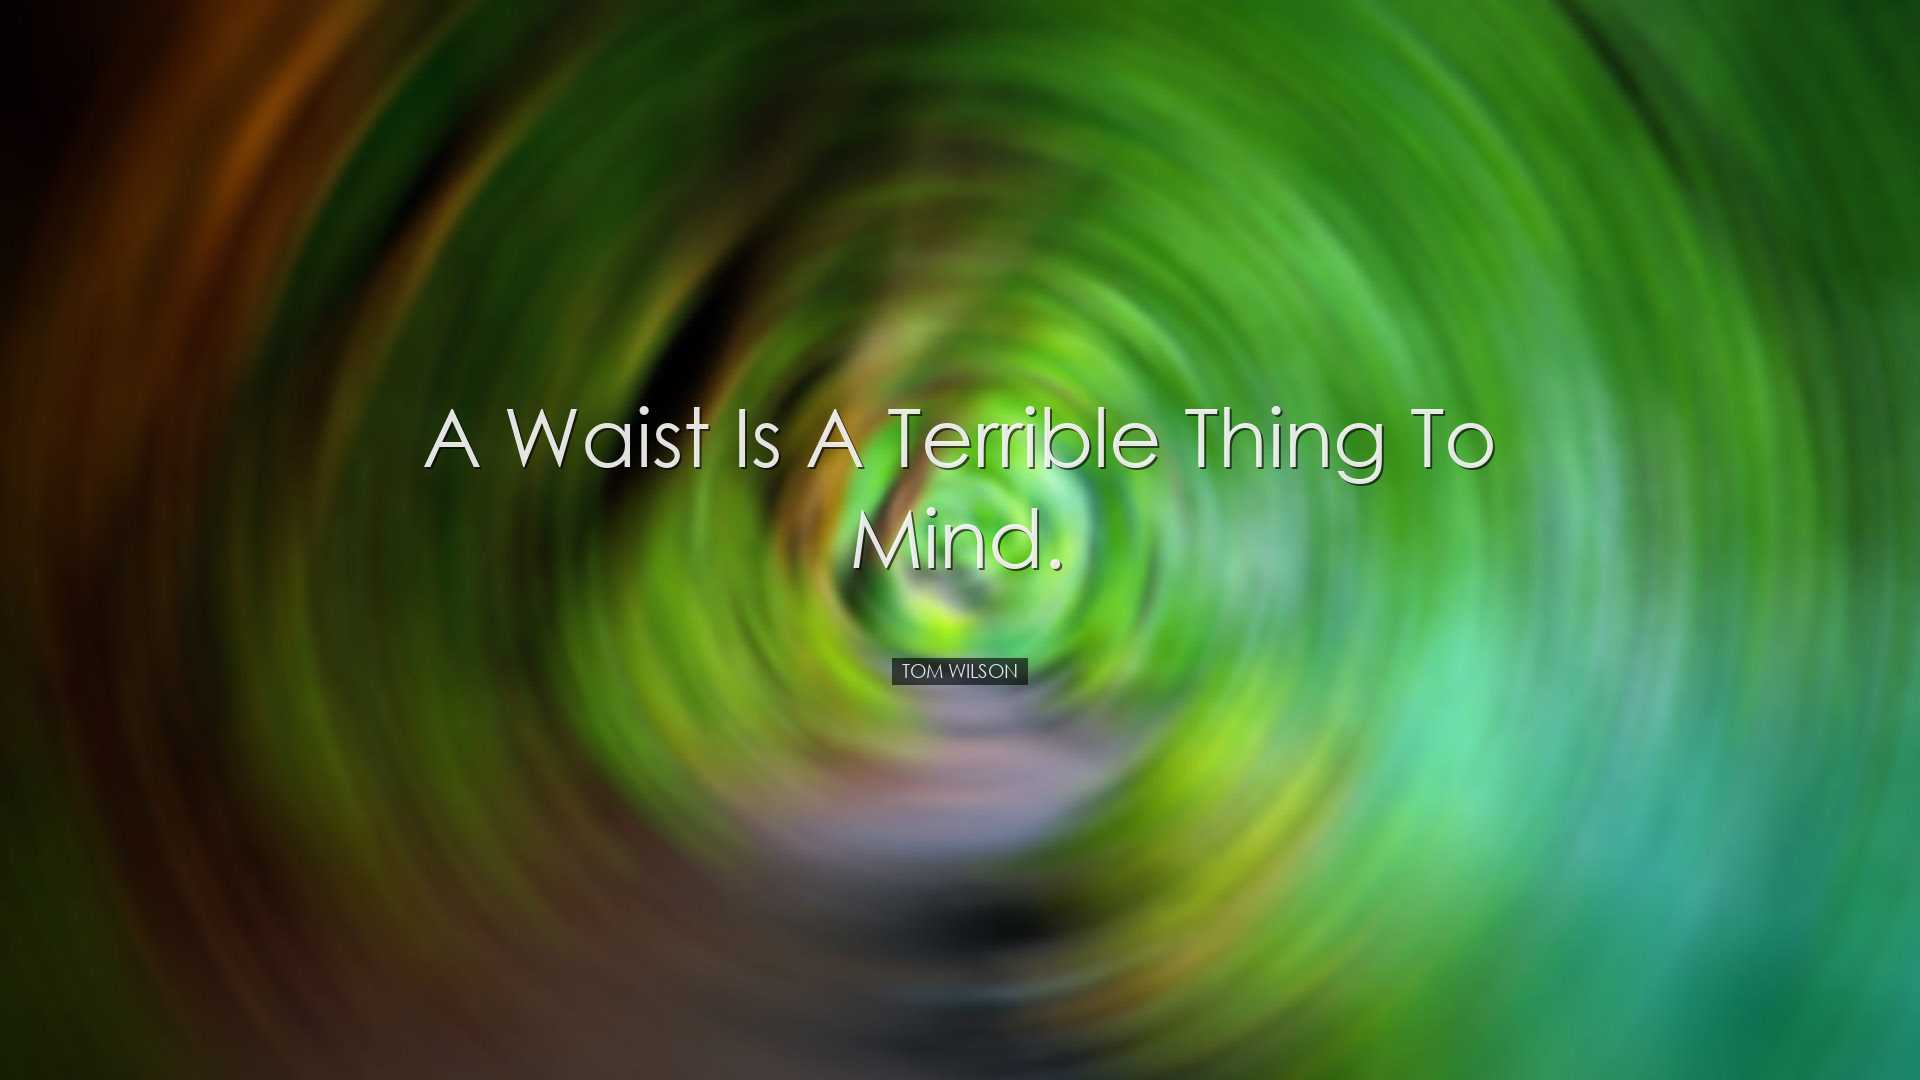 A waist is a terrible thing to mind. - Tom Wilson